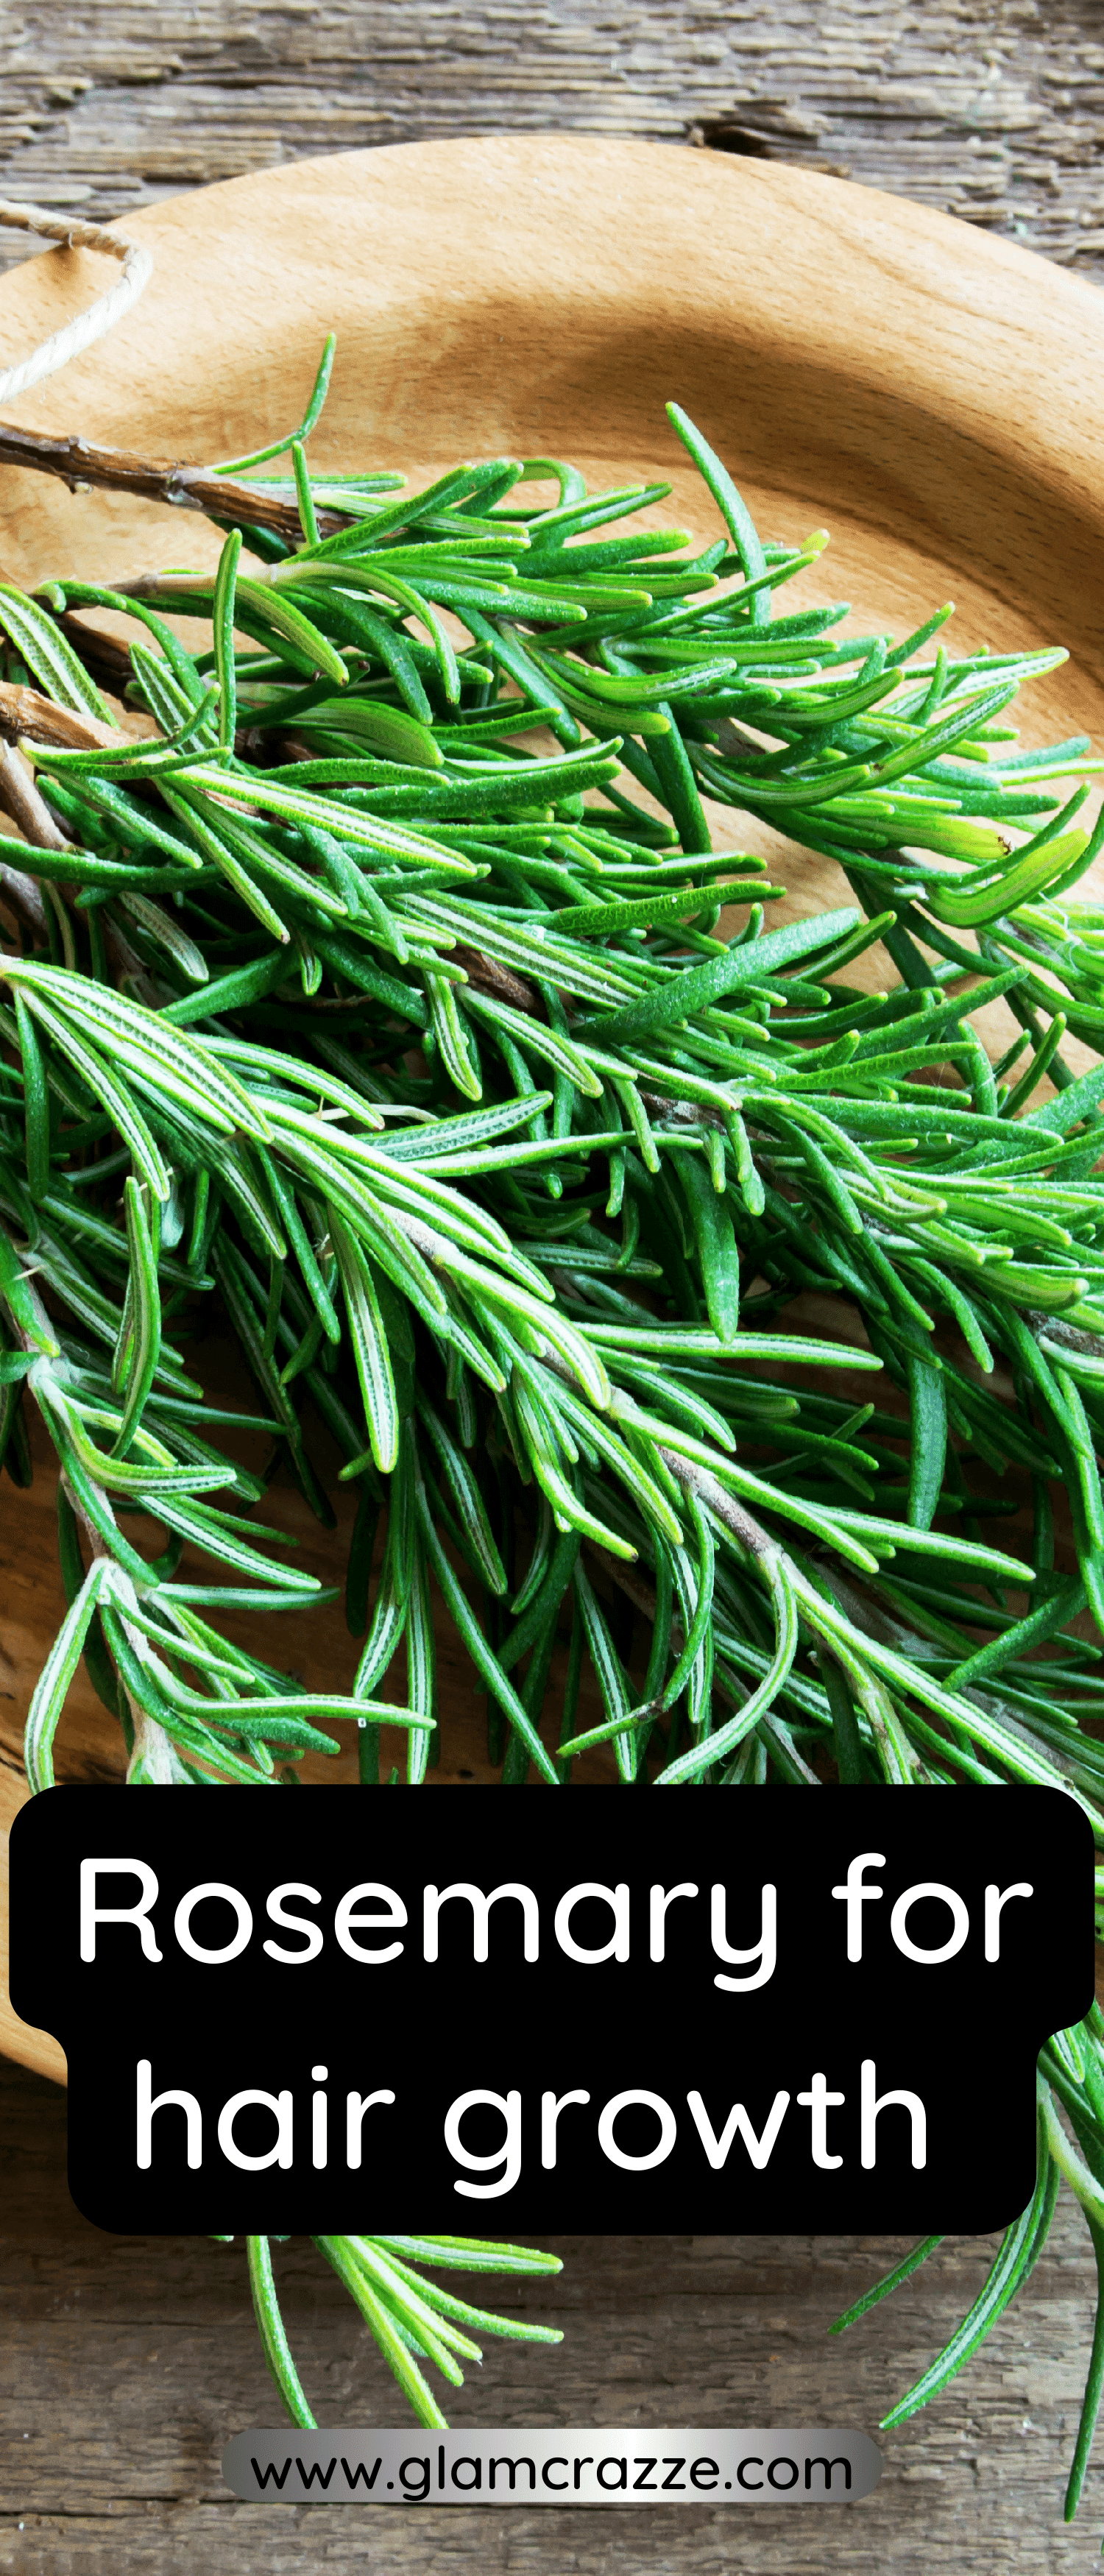 ways to use Rosemary oil for hair growth